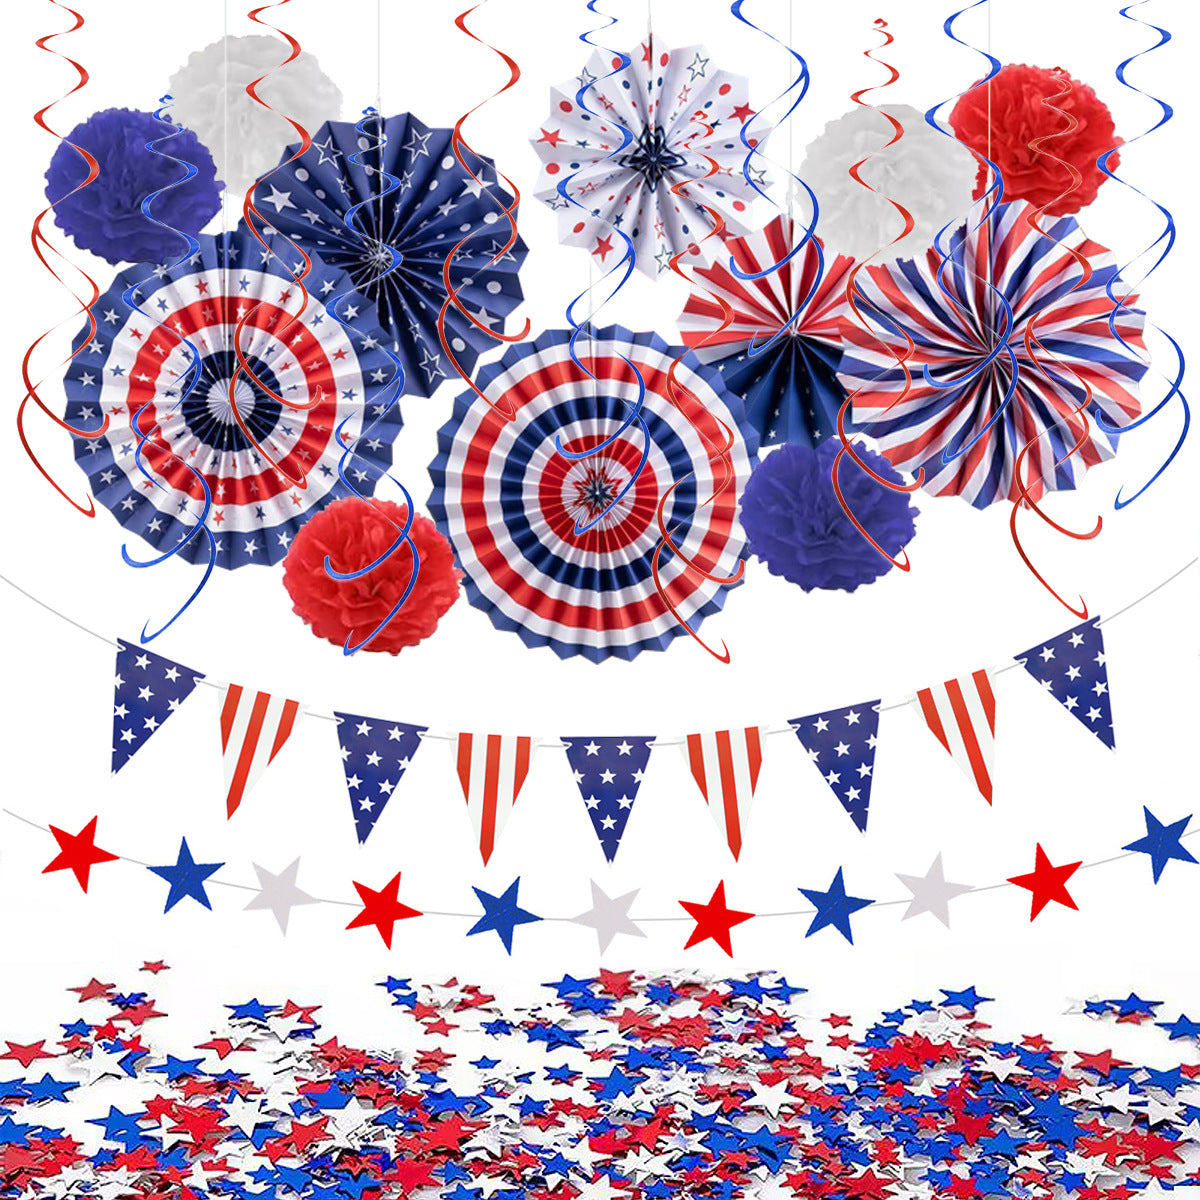 Bulk Independence Day Party Decorations Kit with Red White Blue Hanging Paper Fans Hanging Swirls Flag Pennant Foil Fringe Pom Poms for Holiday Party Supplies Decor Wholesale